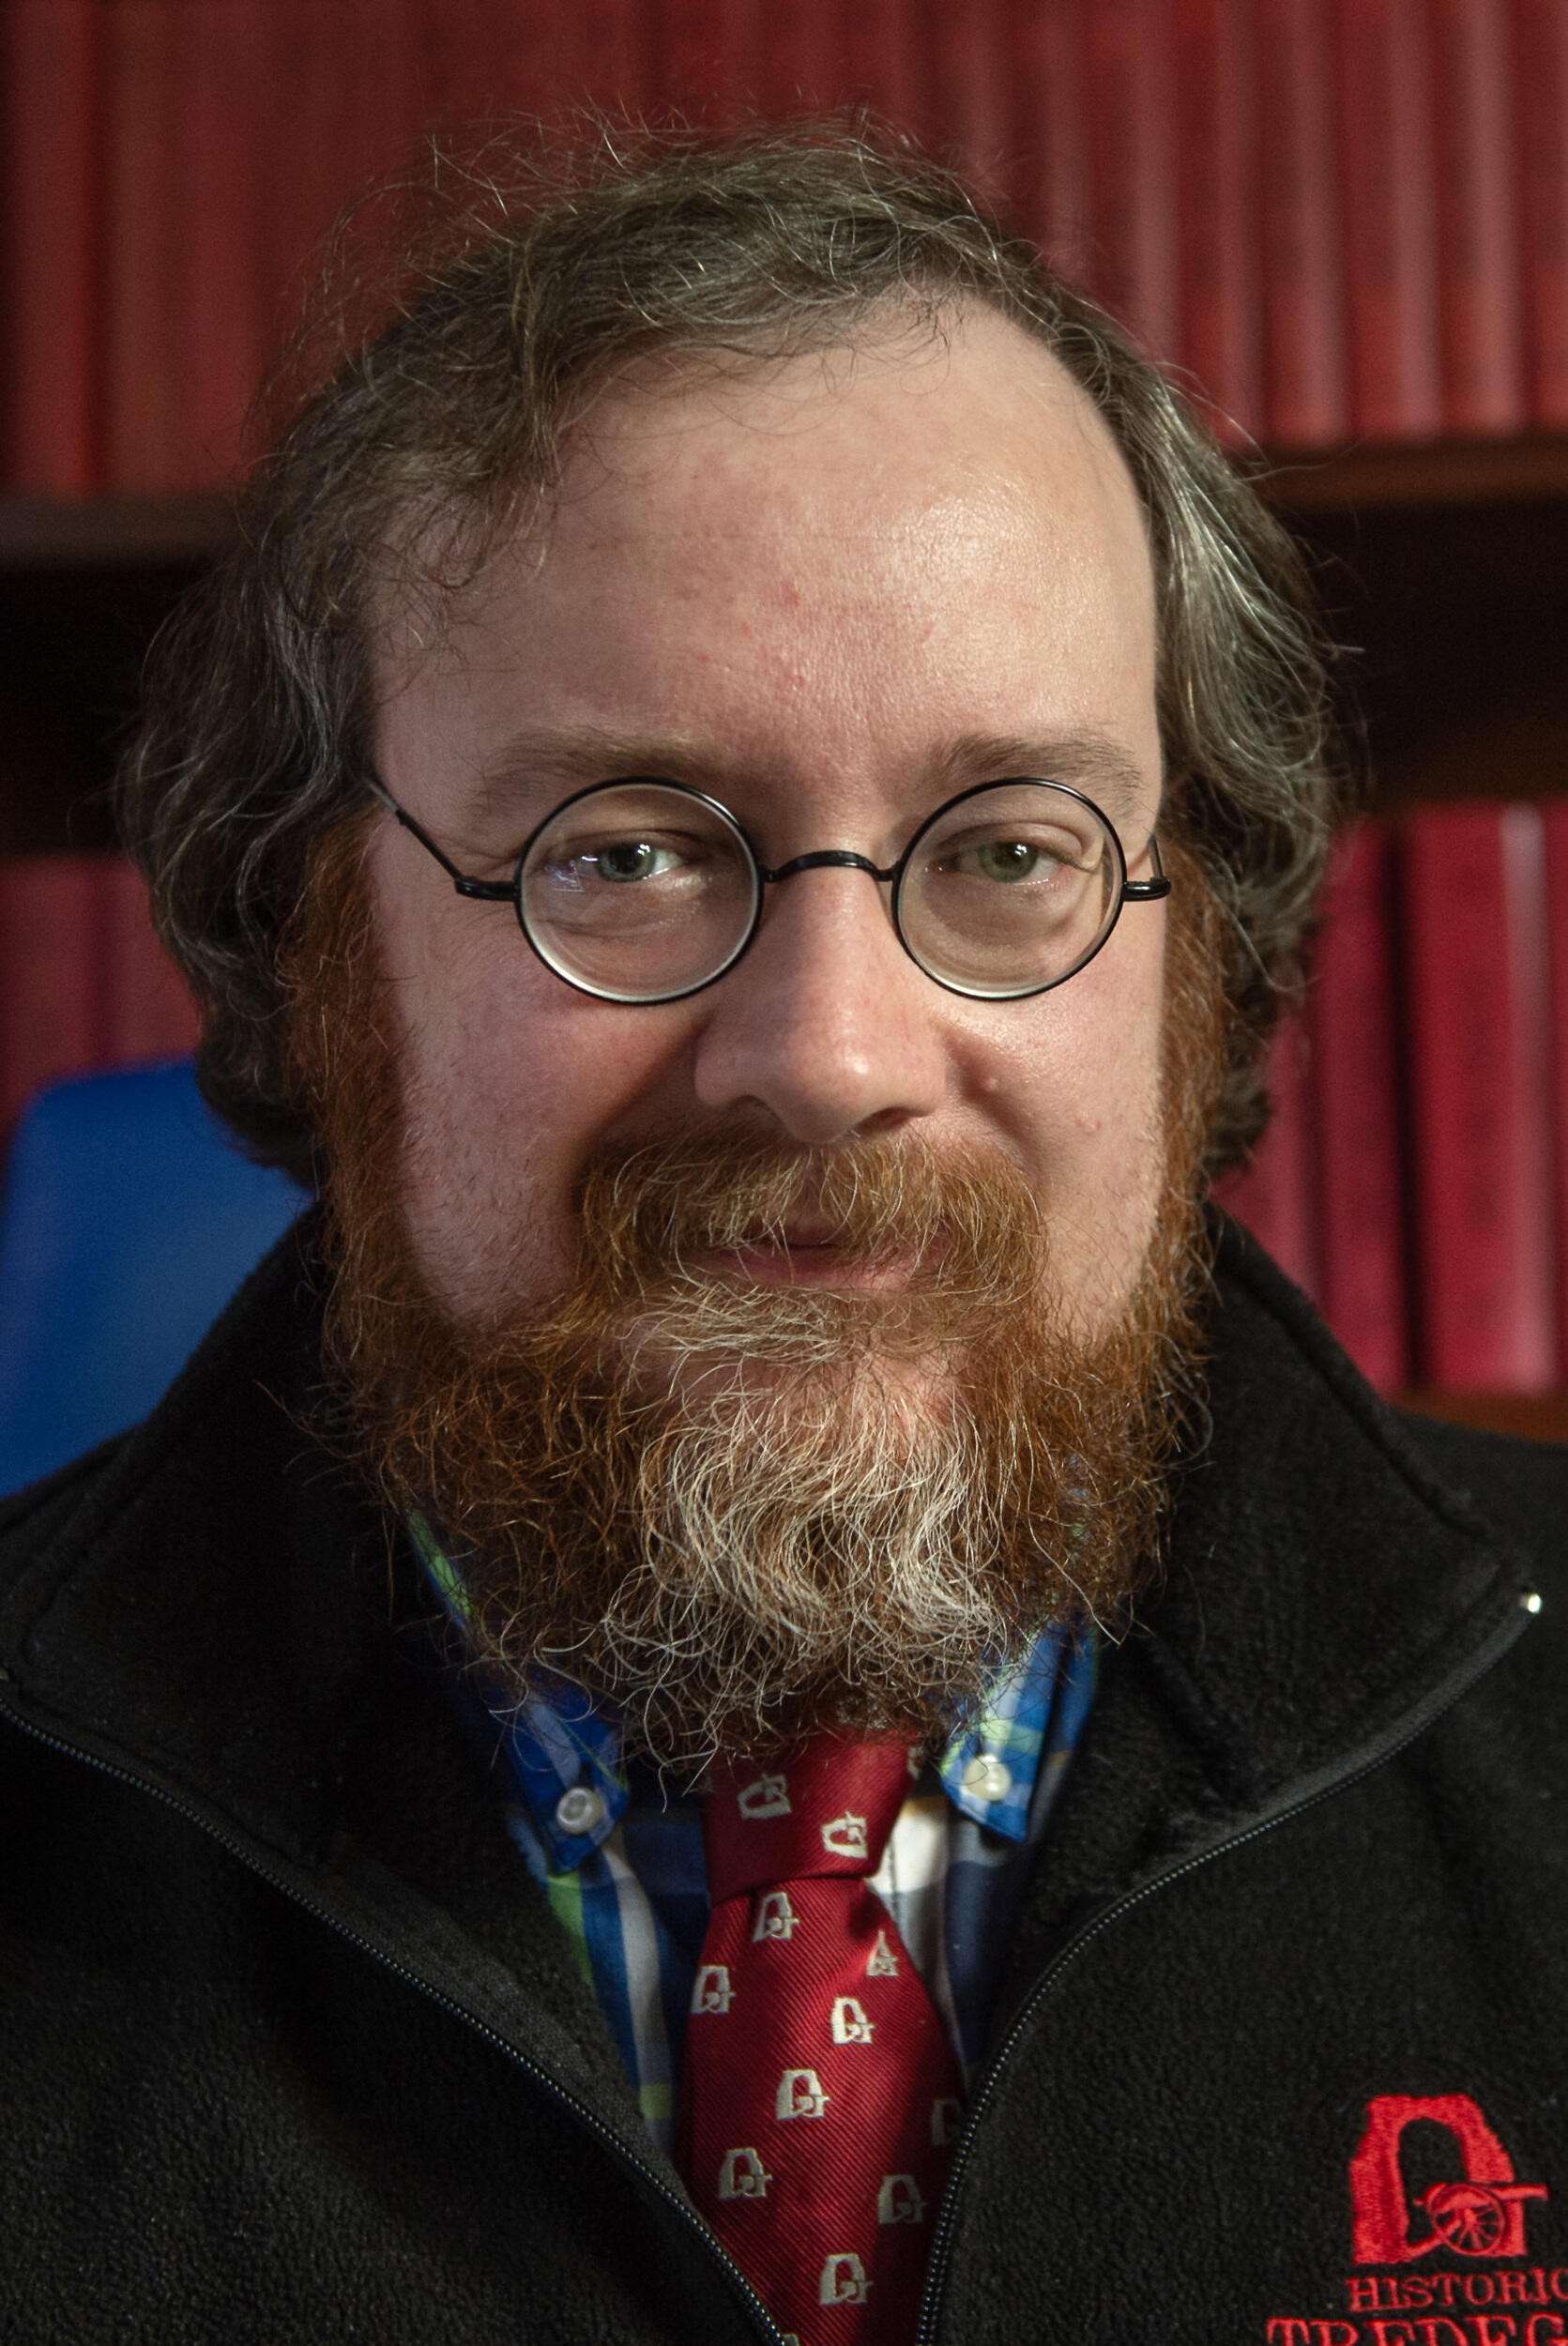 A photo of a man from the shoulders up. He is wearing circular glasses and has a beard. 